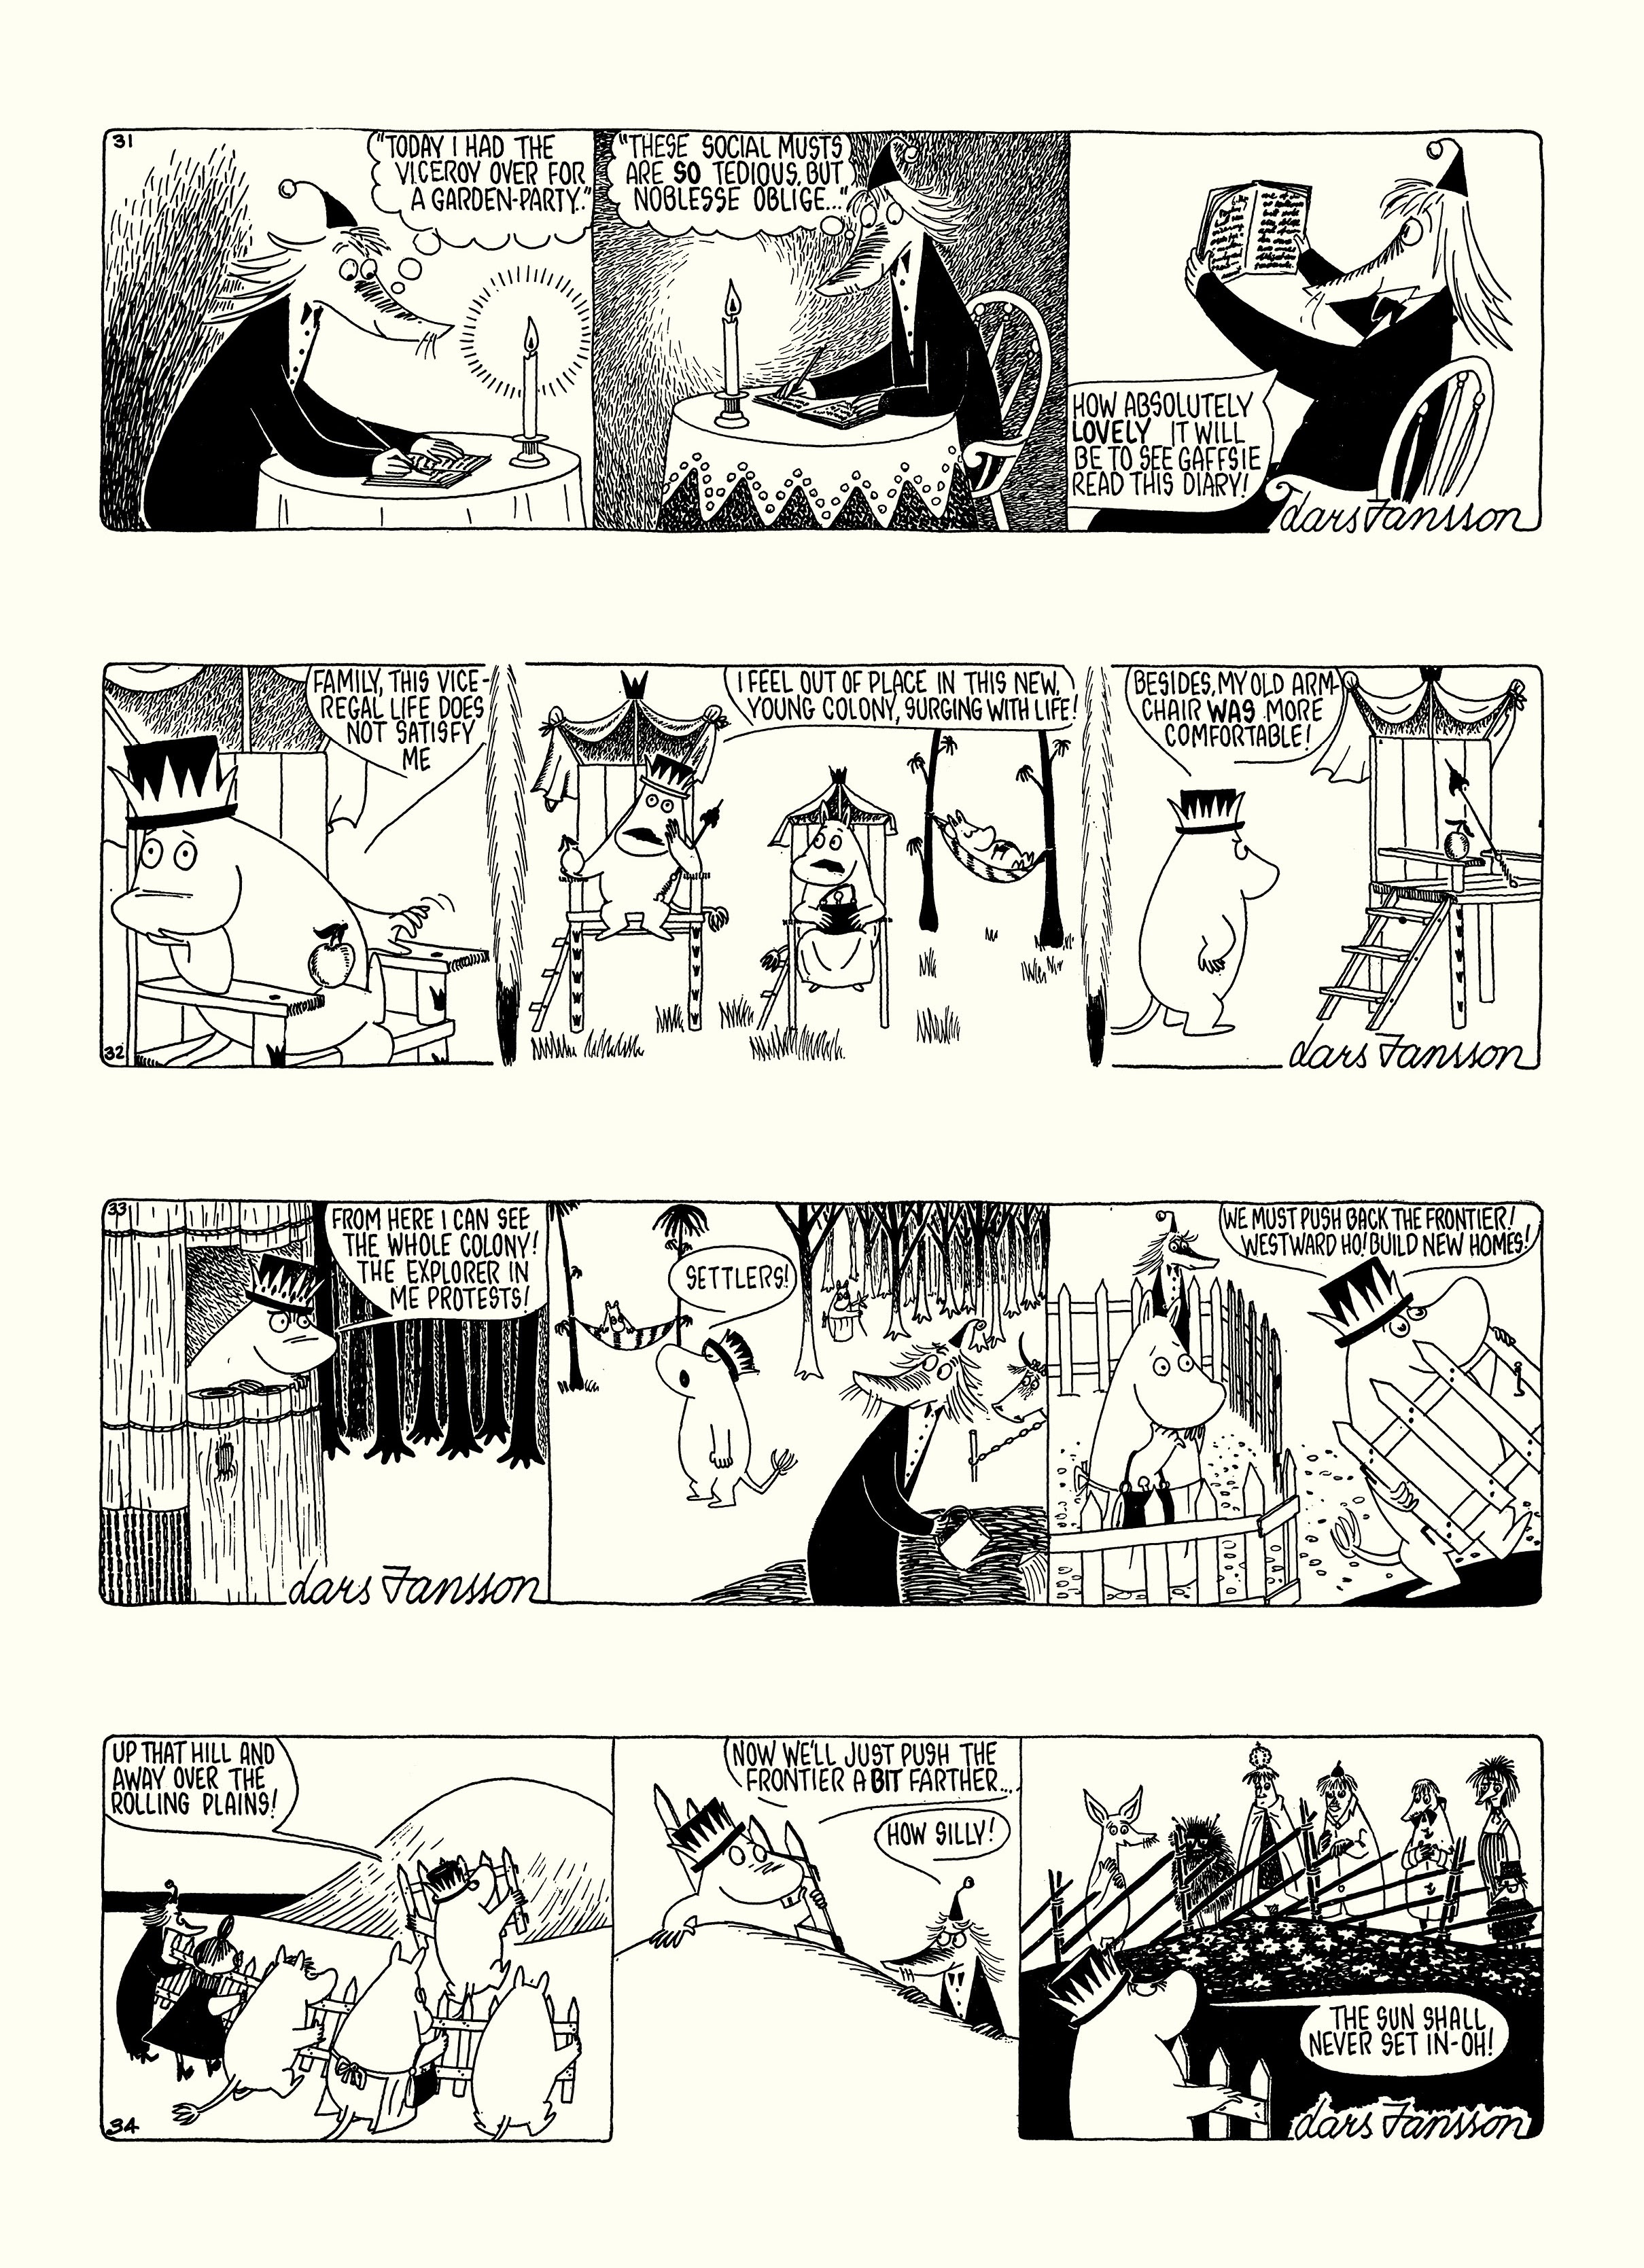 Read online Moomin: The Complete Lars Jansson Comic Strip comic -  Issue # TPB 7 - 14